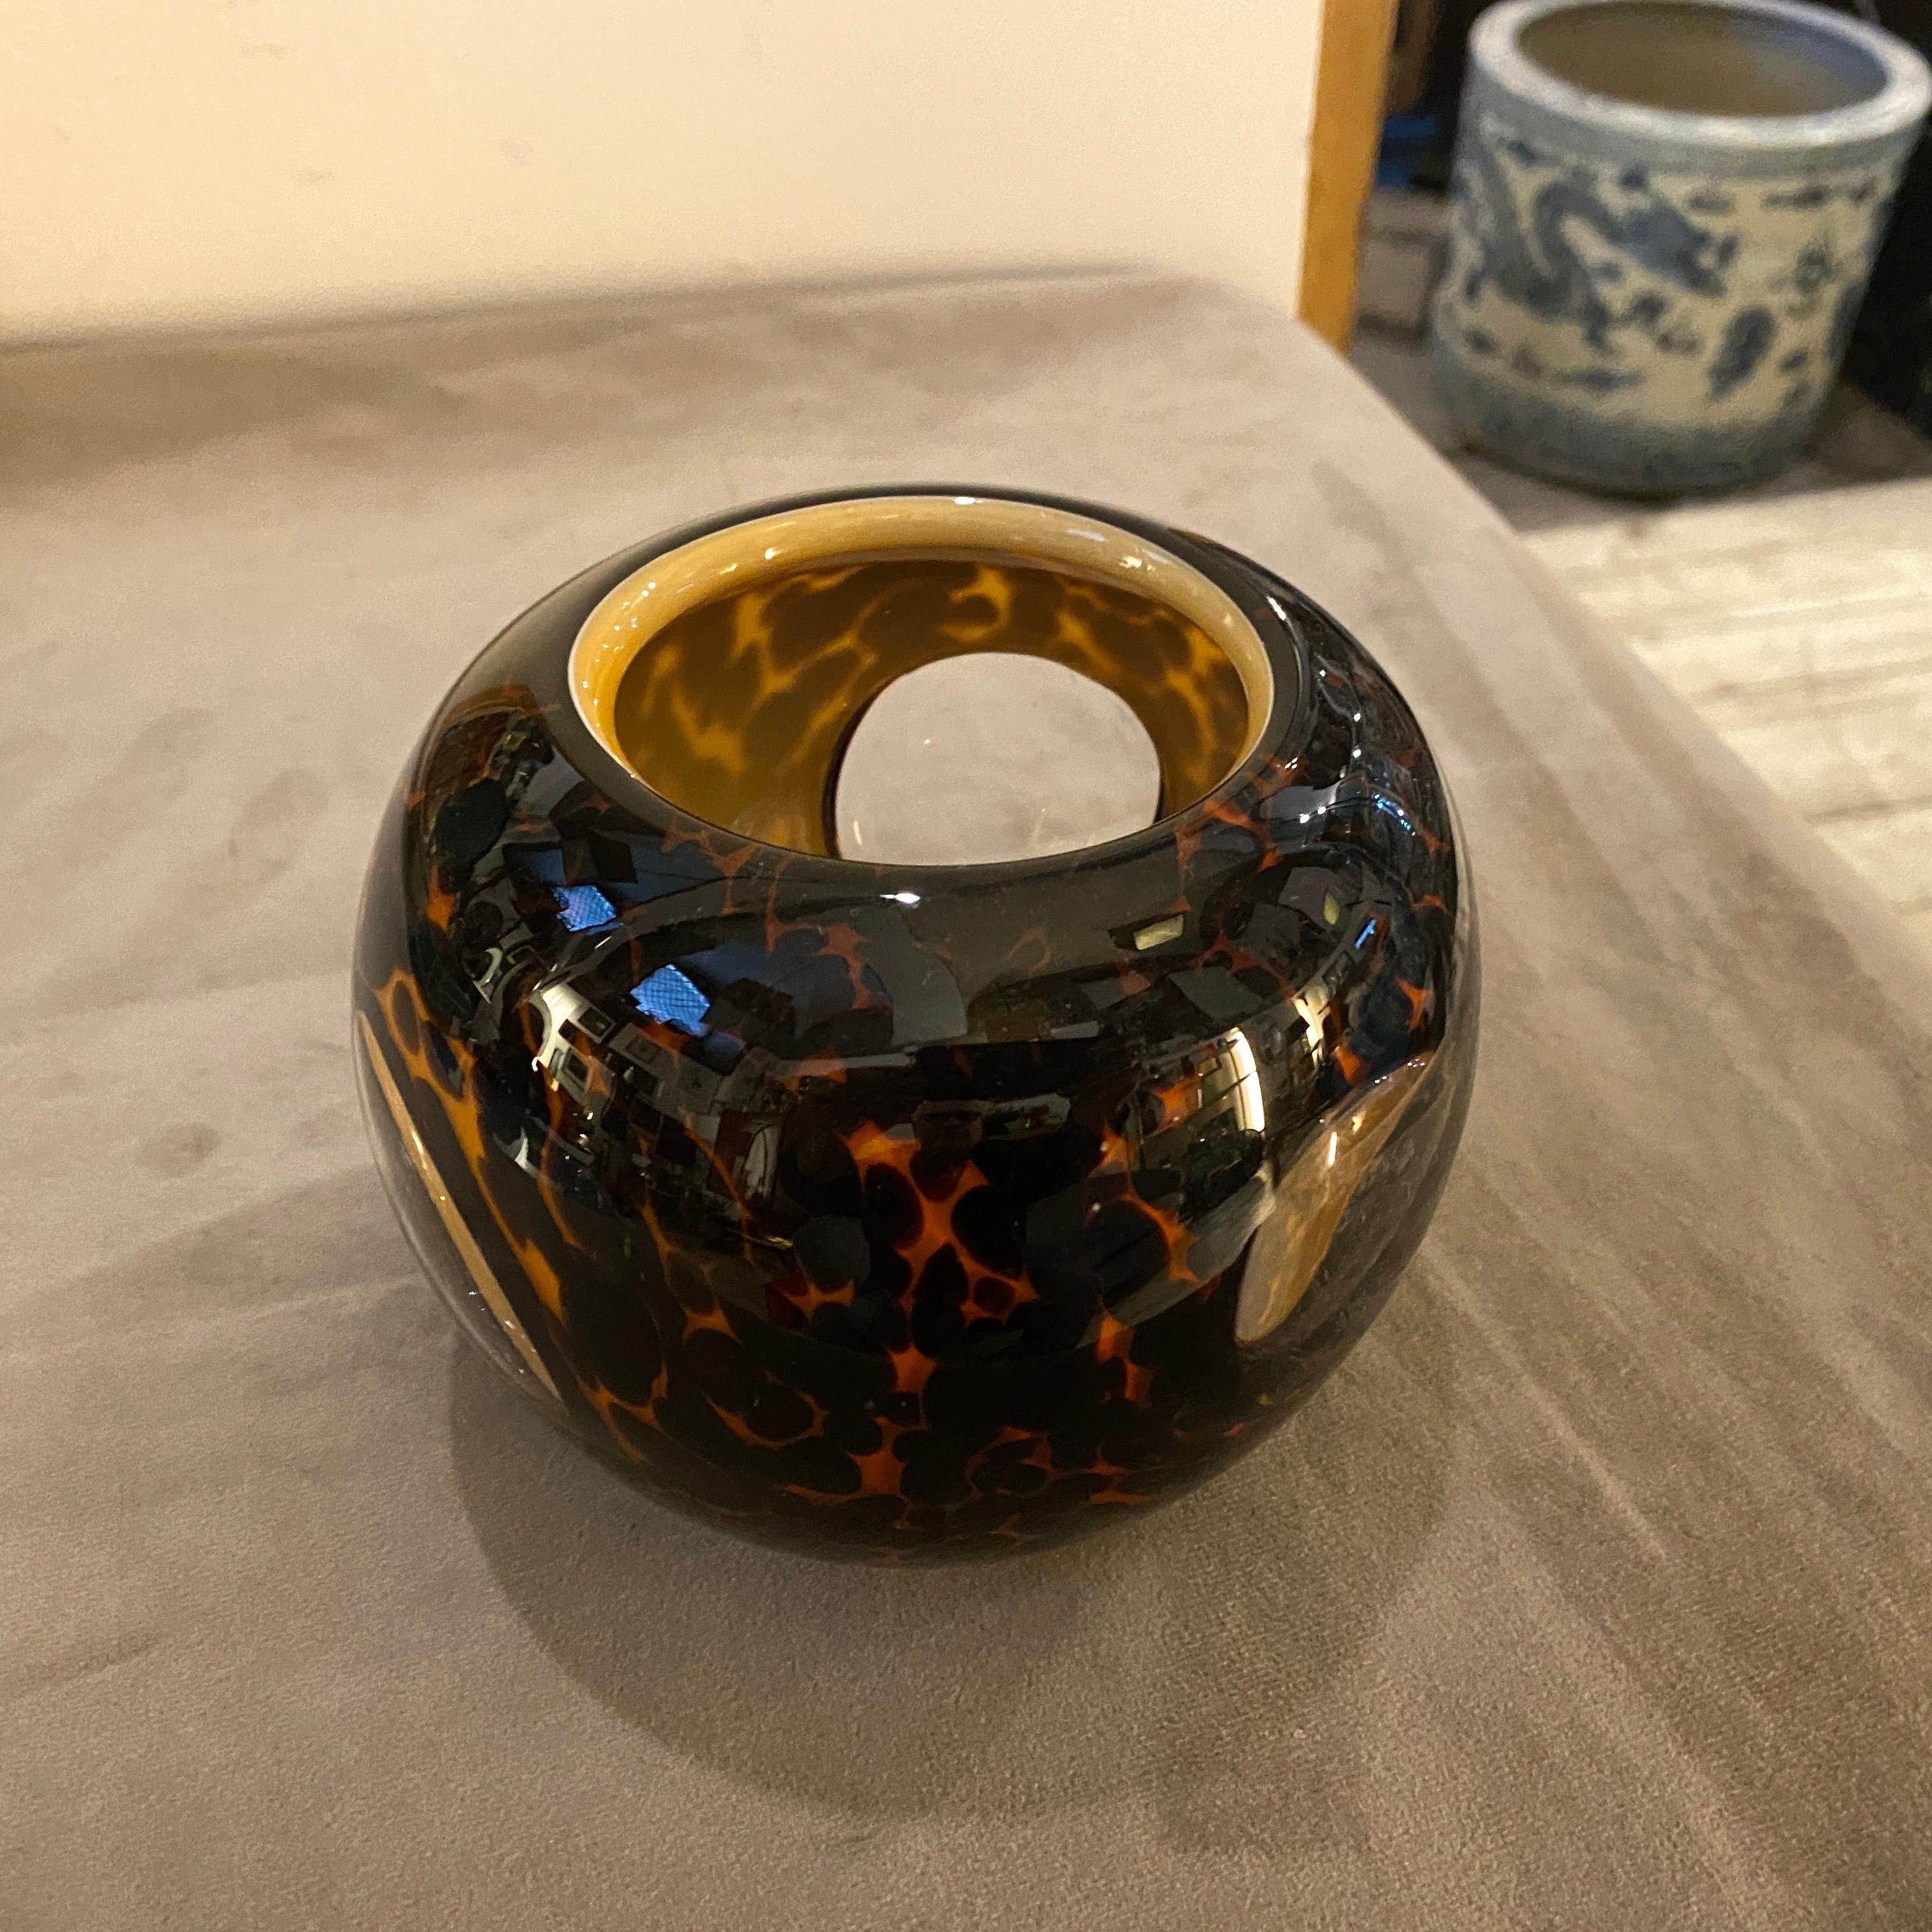 A rare fake tortoise murano glass small bowl made in the Seventies. It has been attributed to Barovier for many items very similar made by the manufacturer.